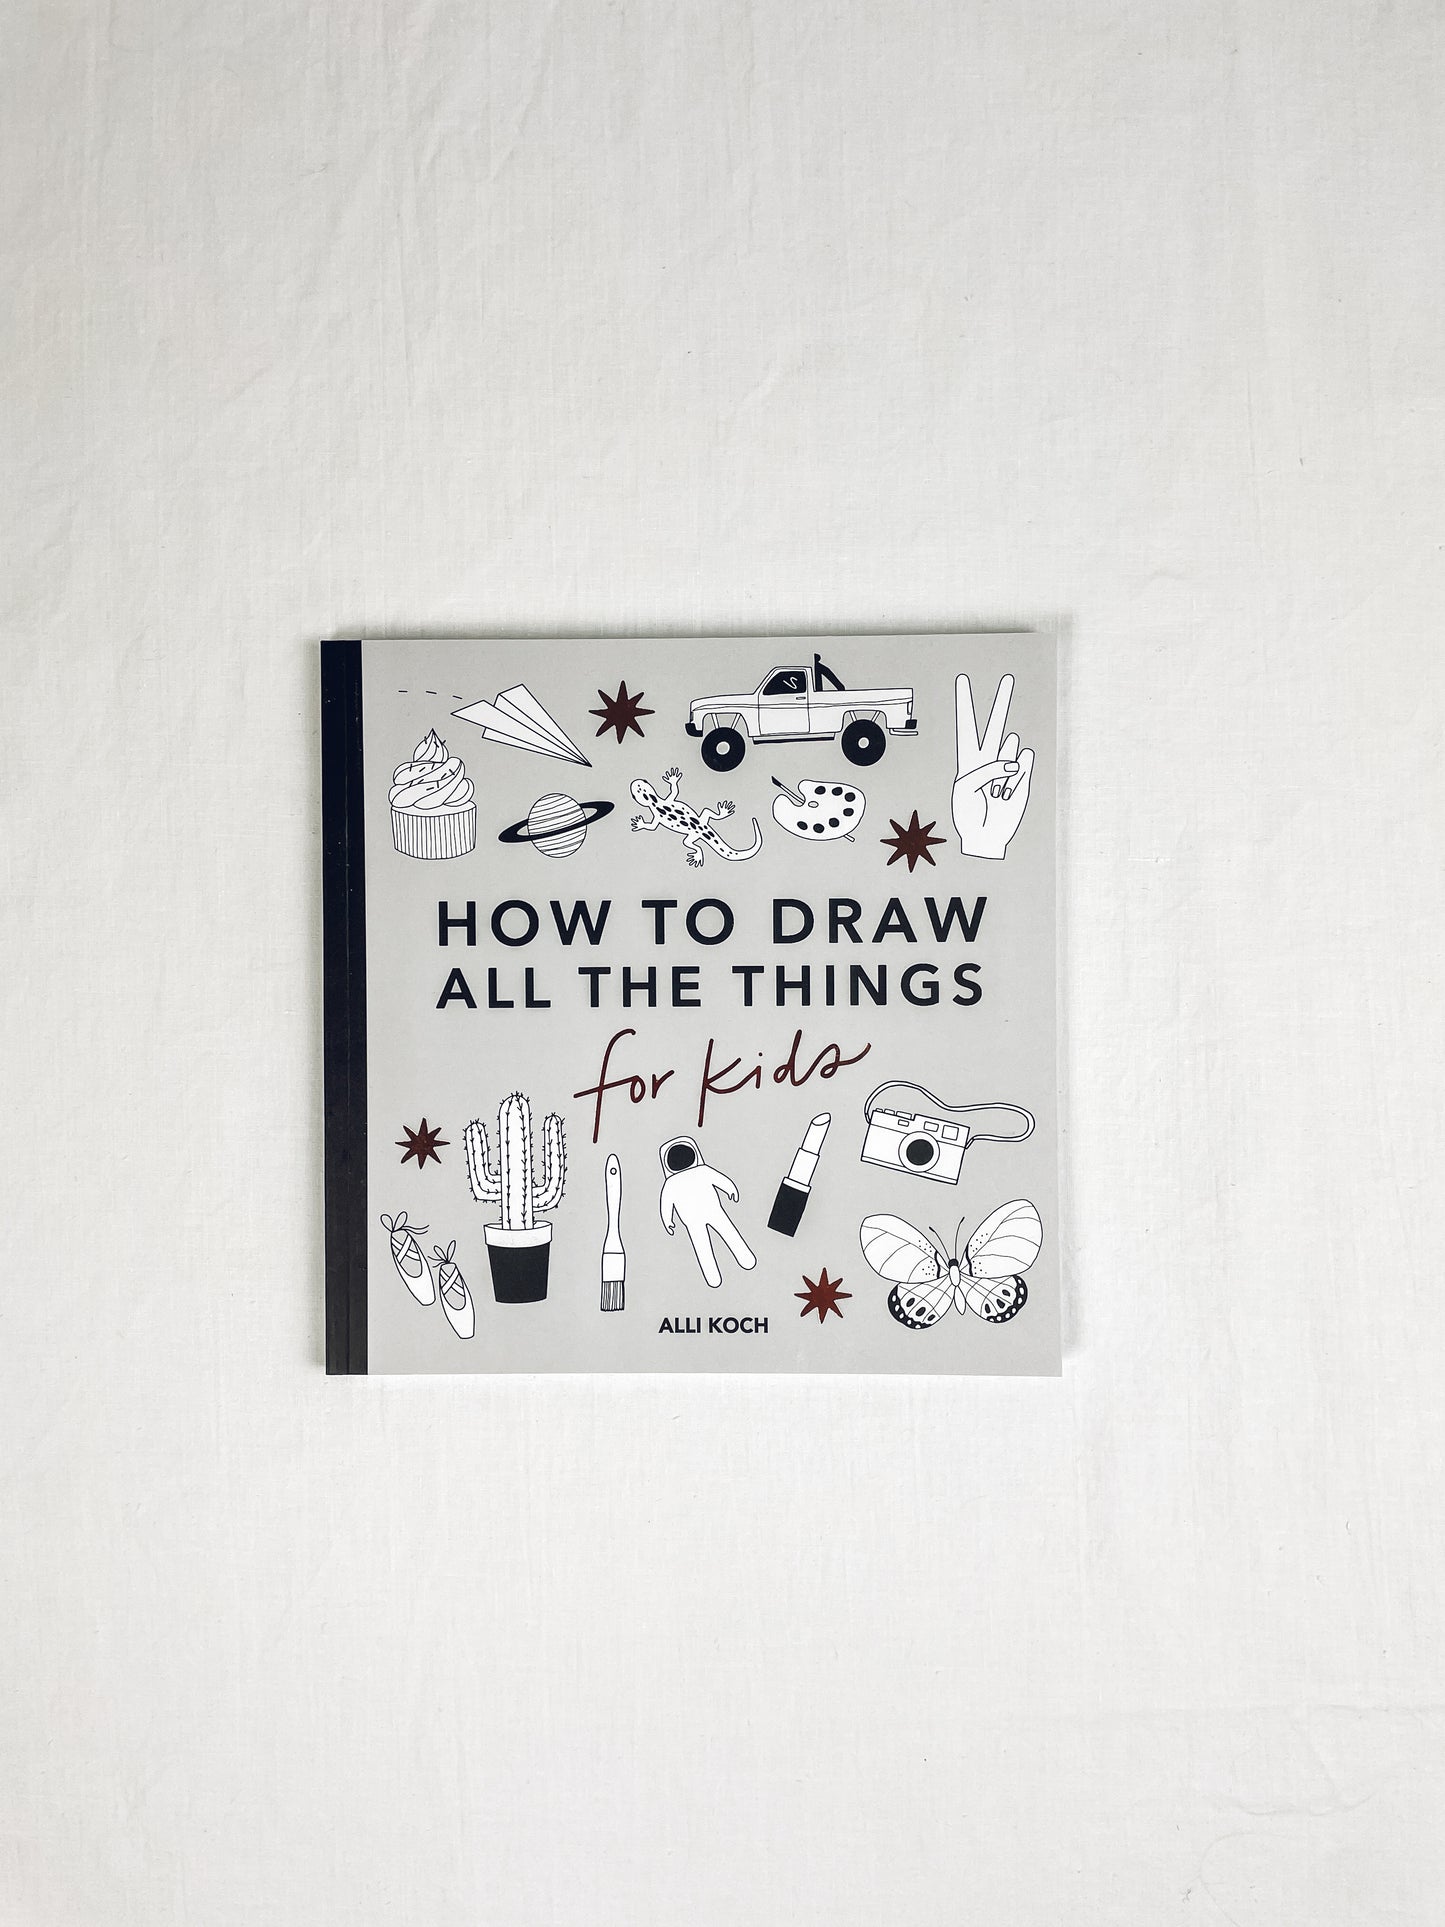 All the Things: How to Draw Book for Kids